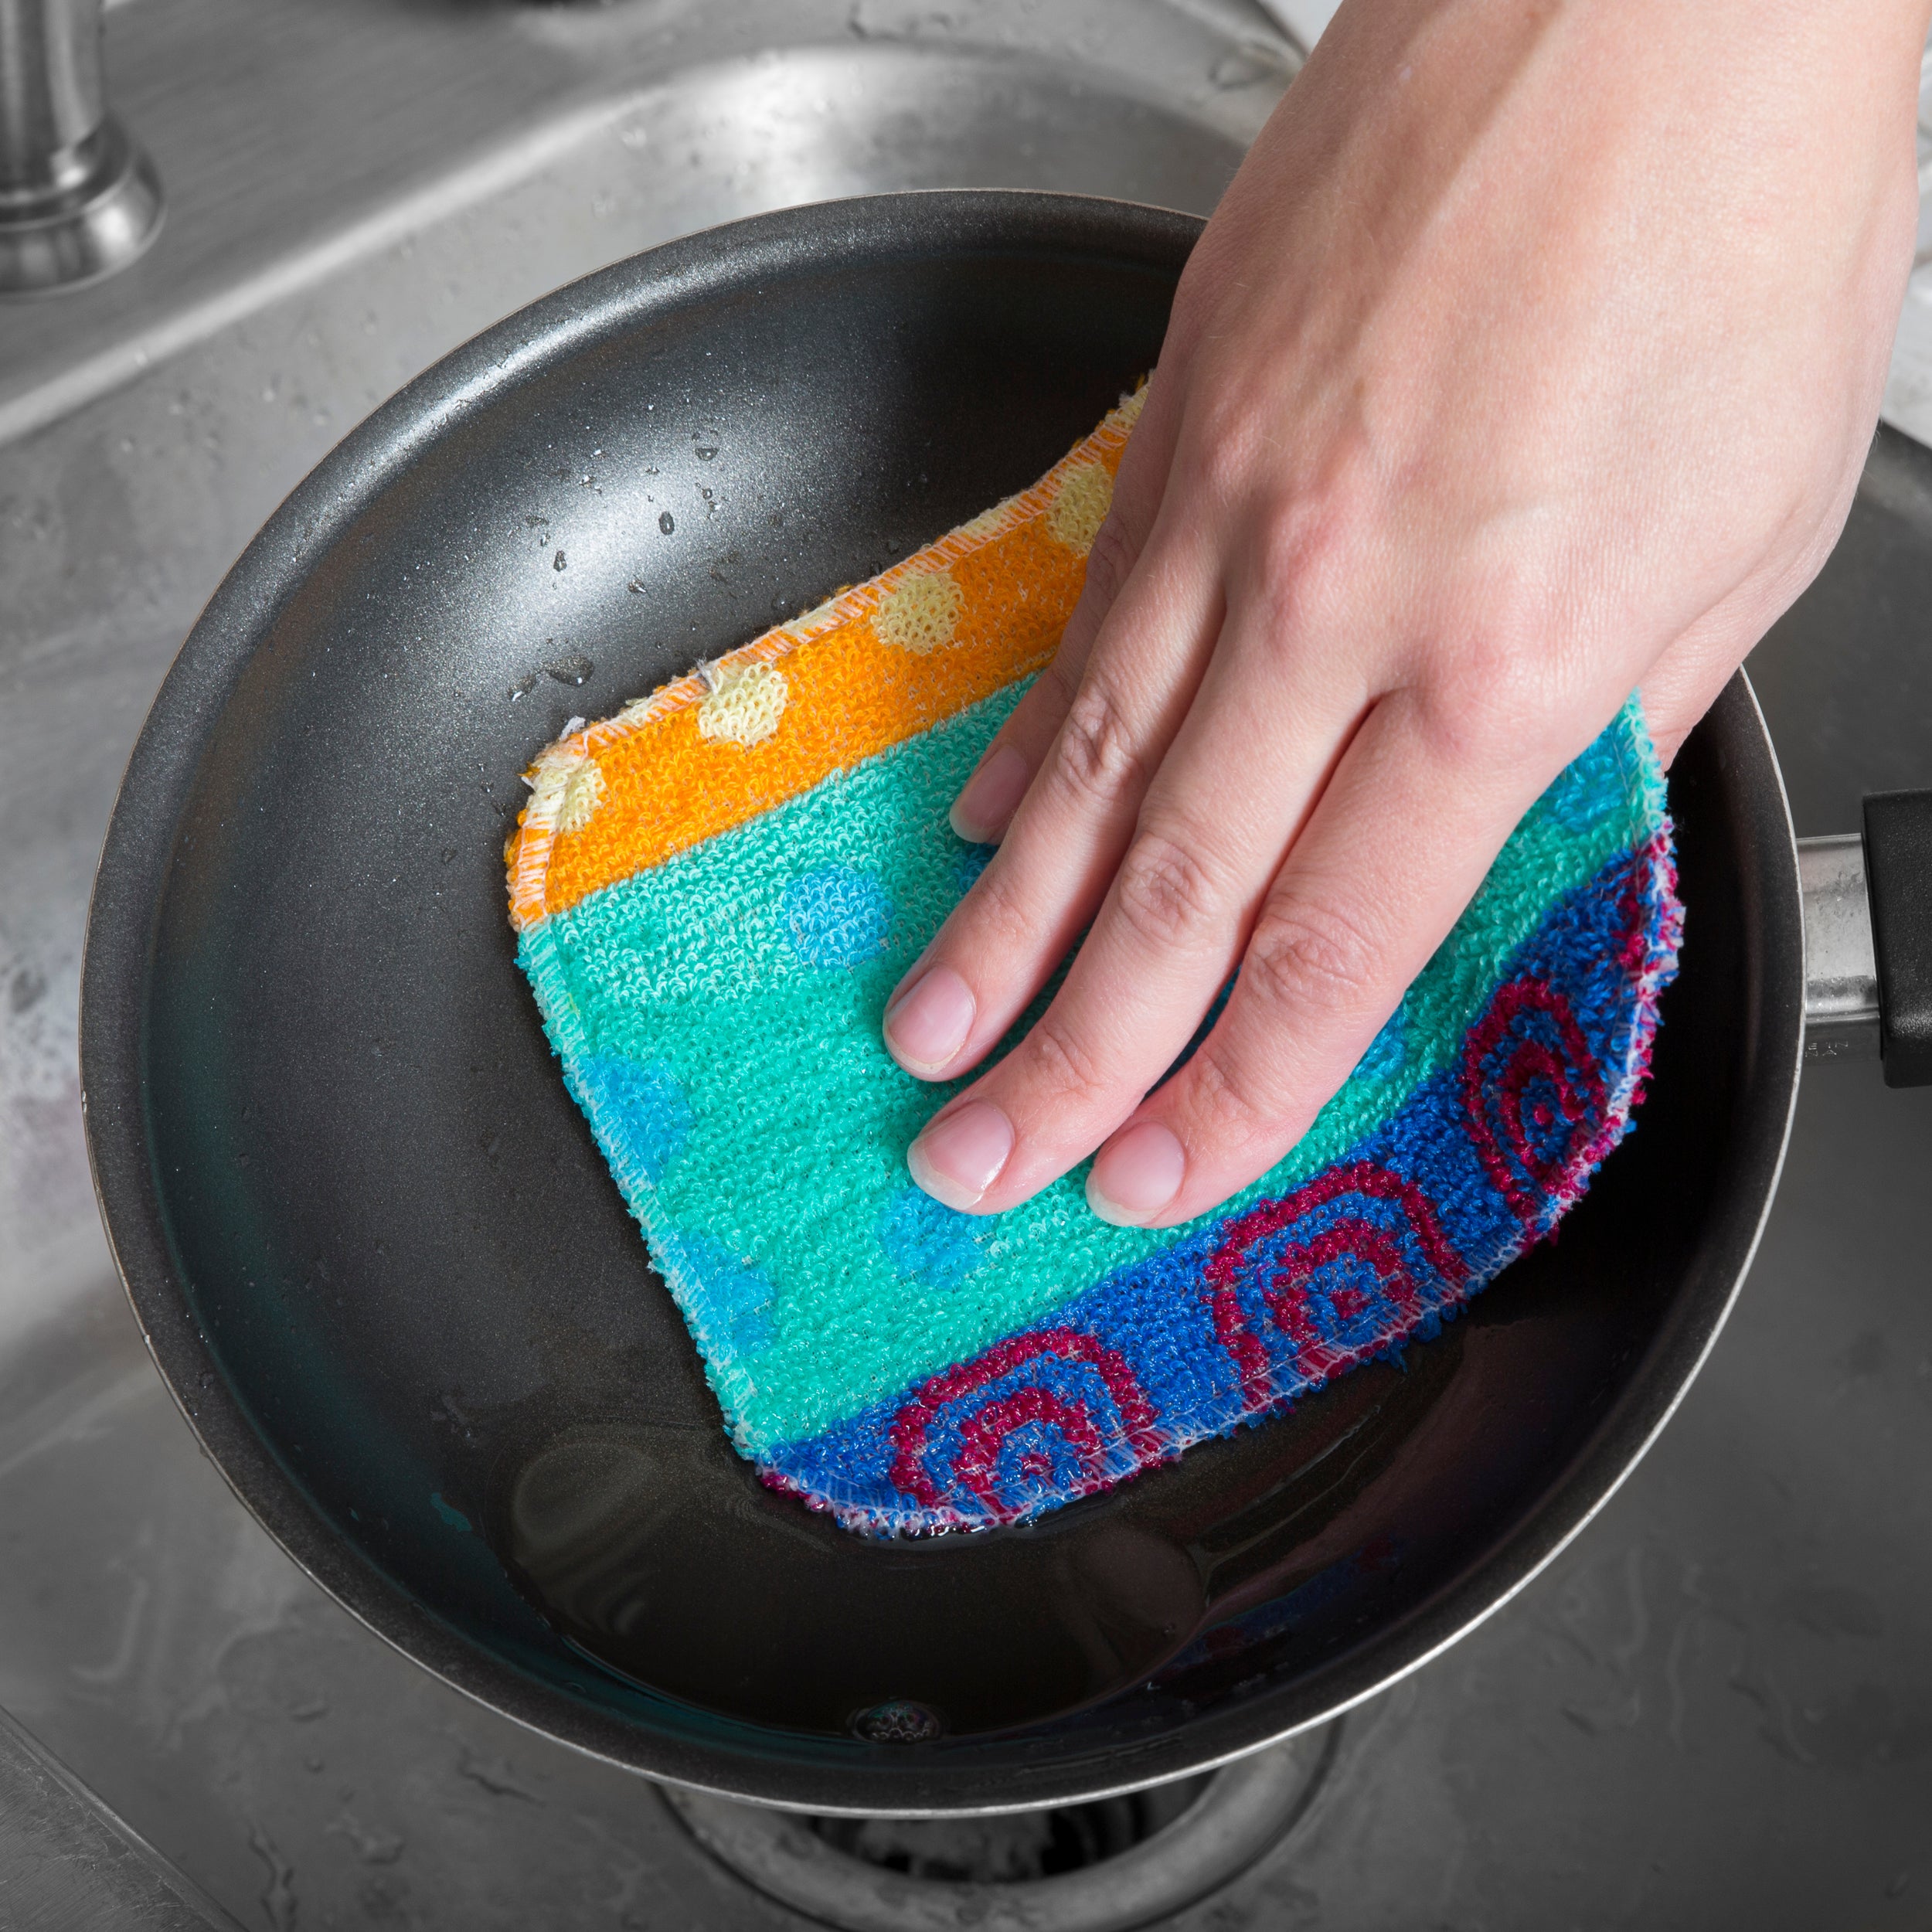 Pot Scrubbers And Scouring Pads Reviews - Which Products Work Best?